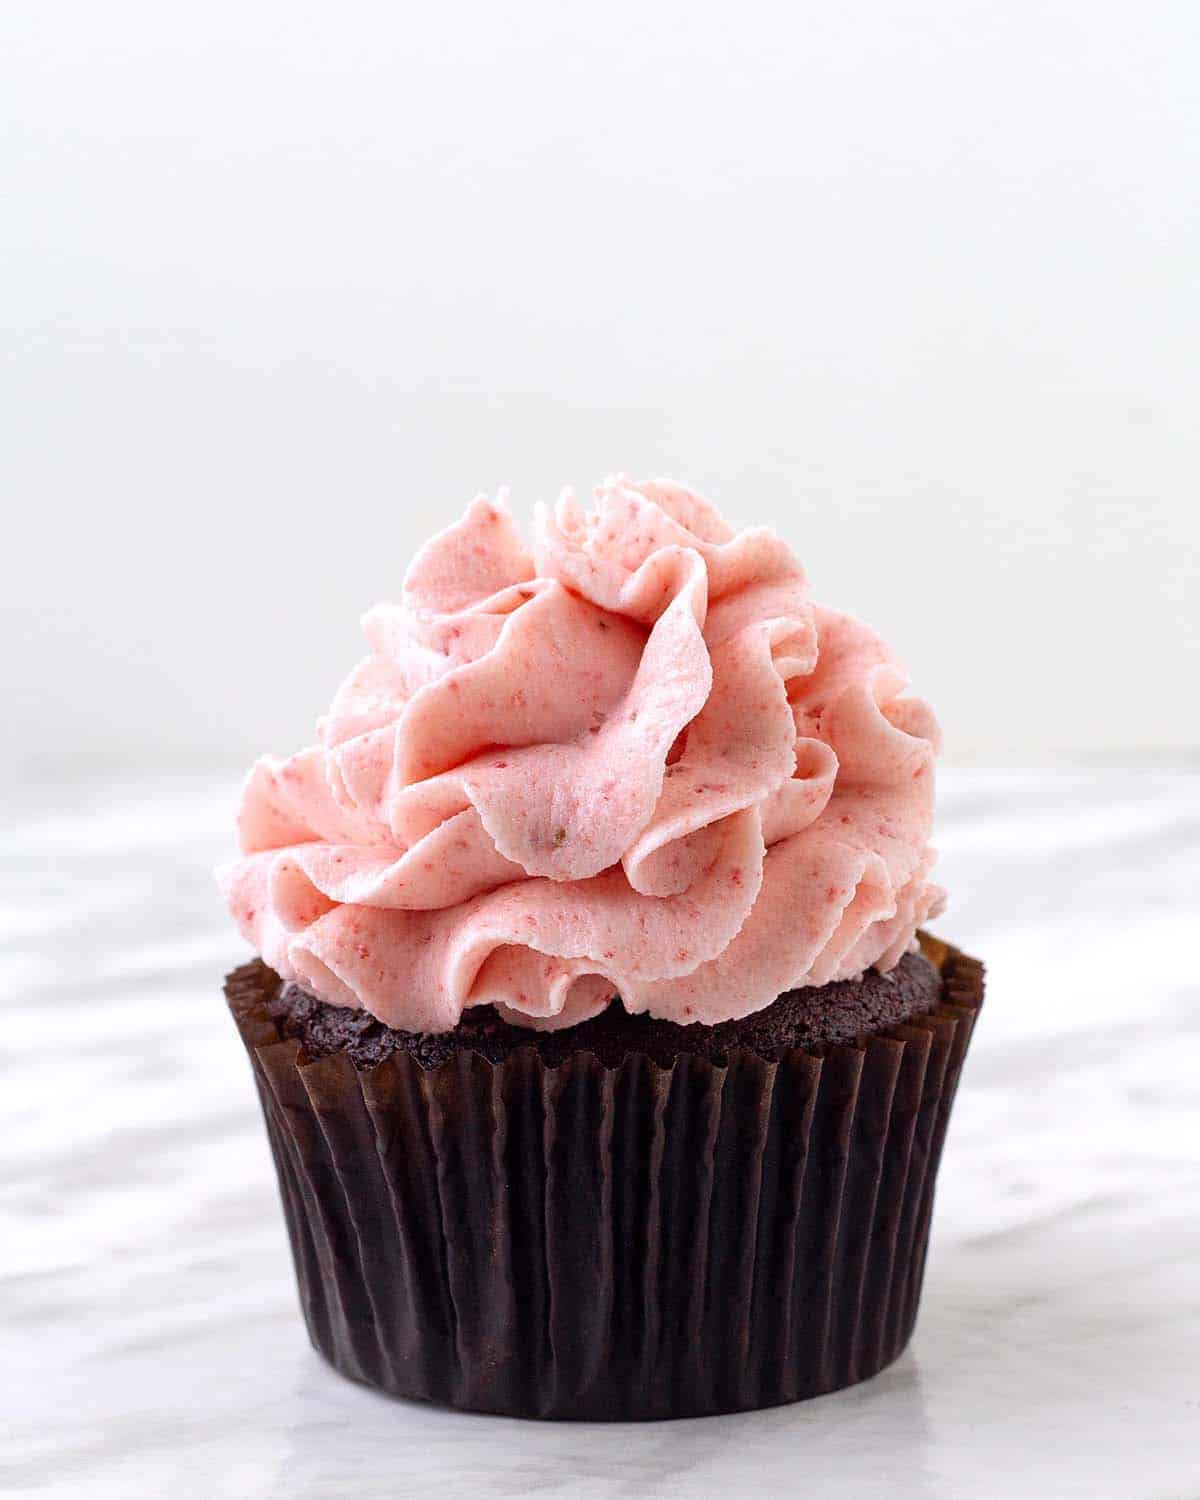 A chocolate cupcake topped with dairy-free strawberry frosting.